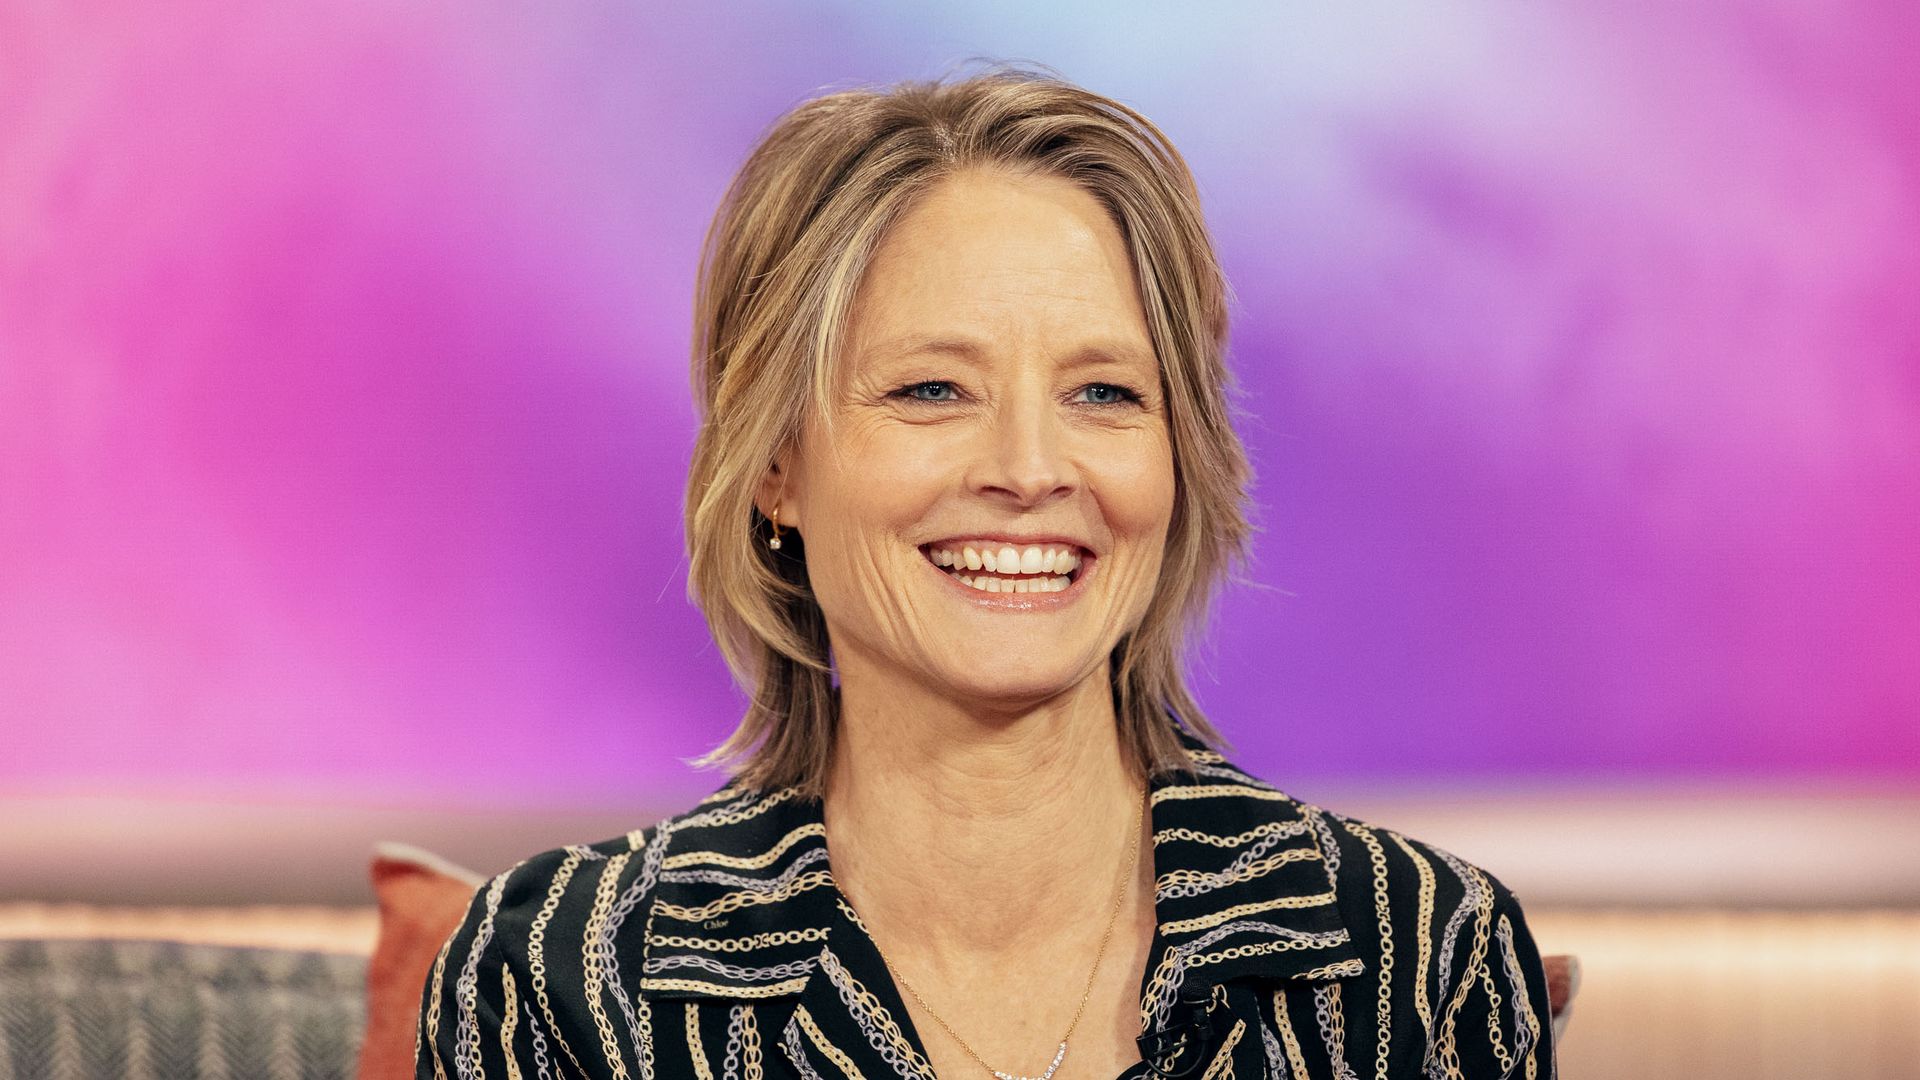 THE KELLY CLARKSON SHOW -- Episode 7I064 -- Pictured: Jodie Foster